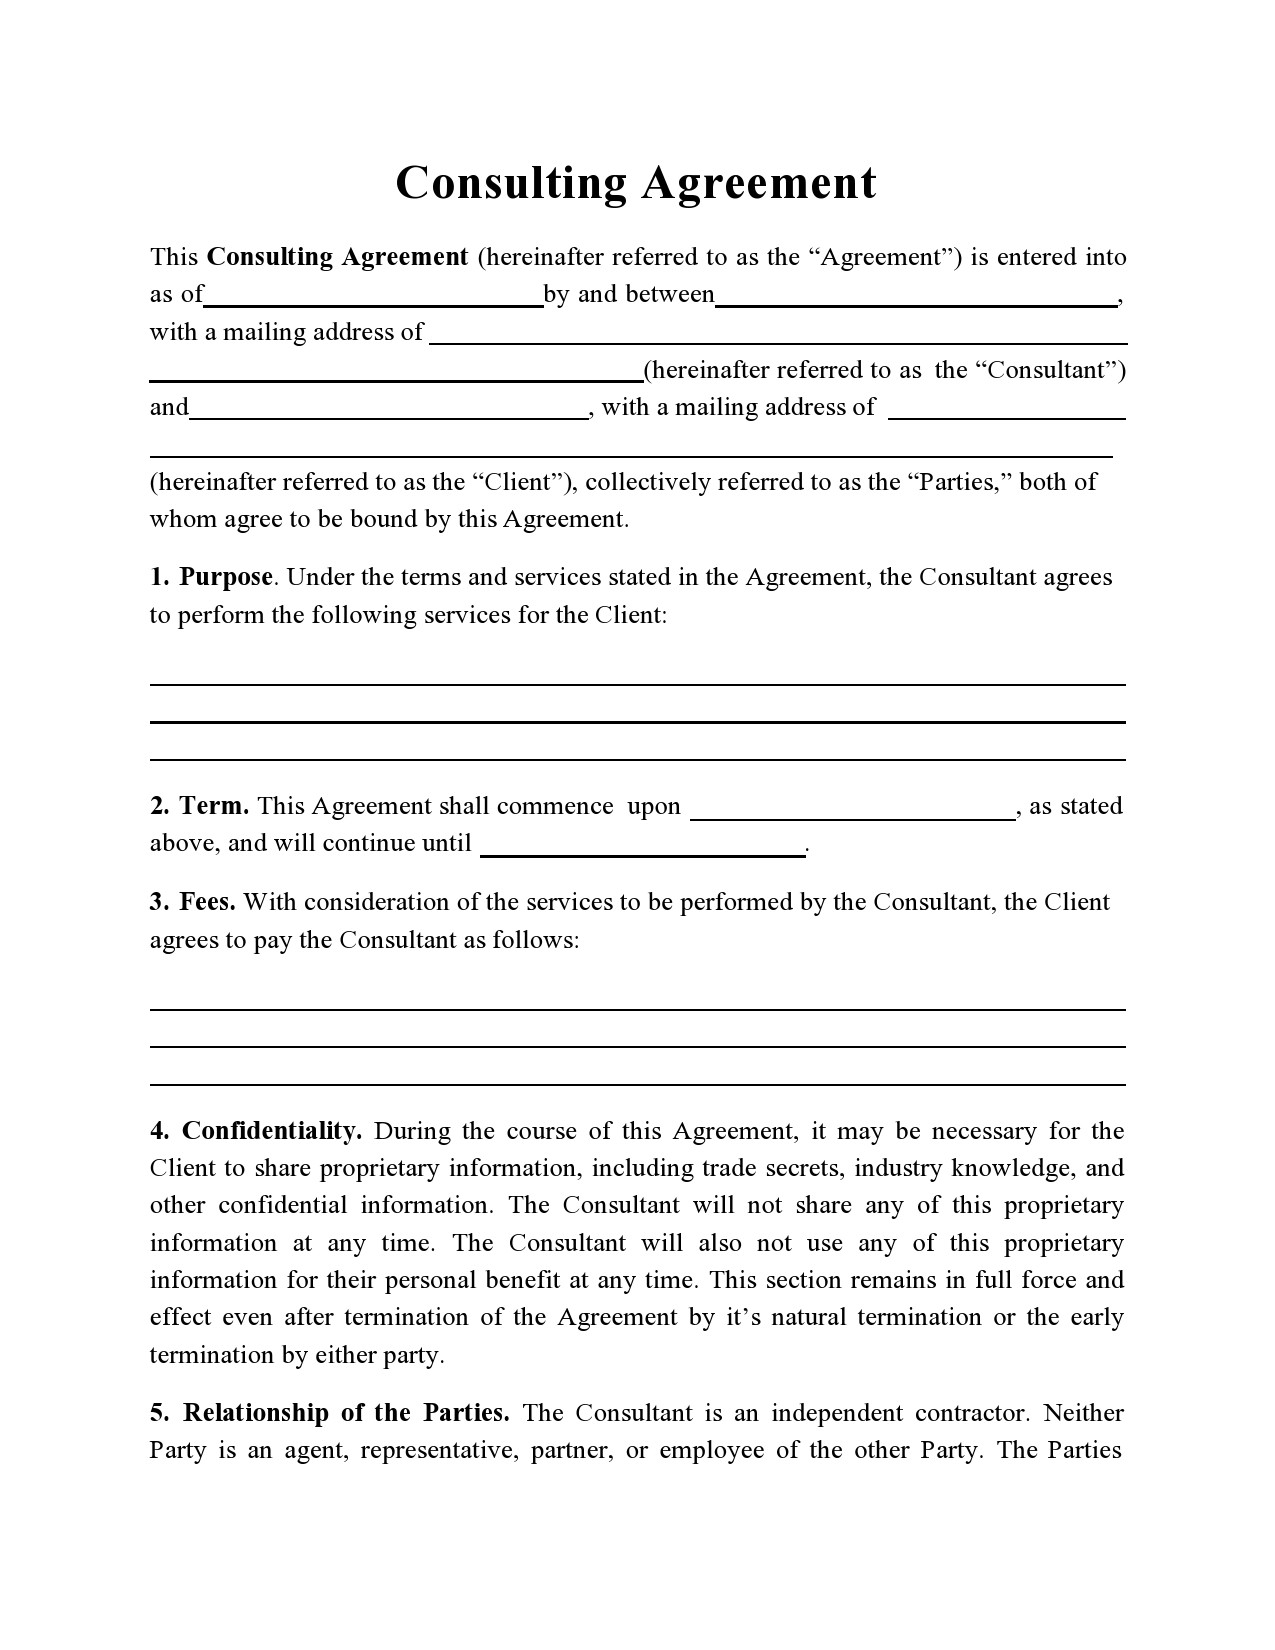 Free consulting contract template 36